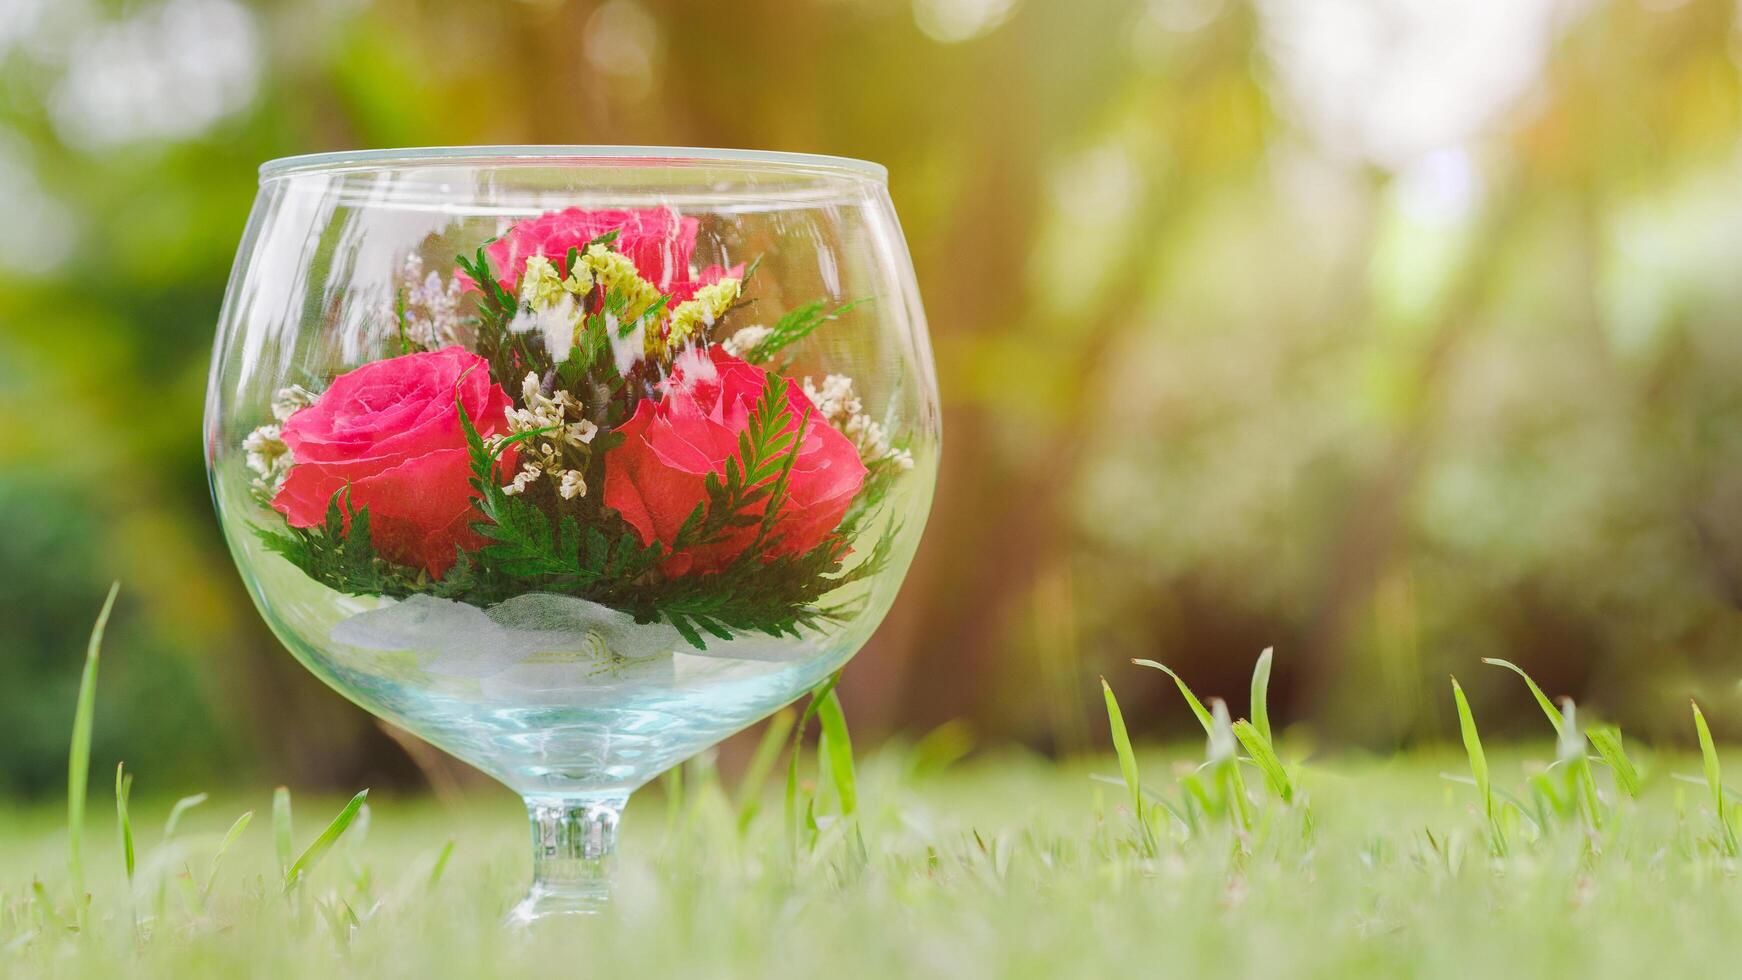 https://static.vecteezy.com/system/resources/previews/006/803/027/non_2x/crystal-wine-glasses-are-large-decorated-with-a-red-rose-on-the-meadow-with-beautiful-lighting-fair-coppy-space-gift-ideas-for-lovers-free-photo.jpg